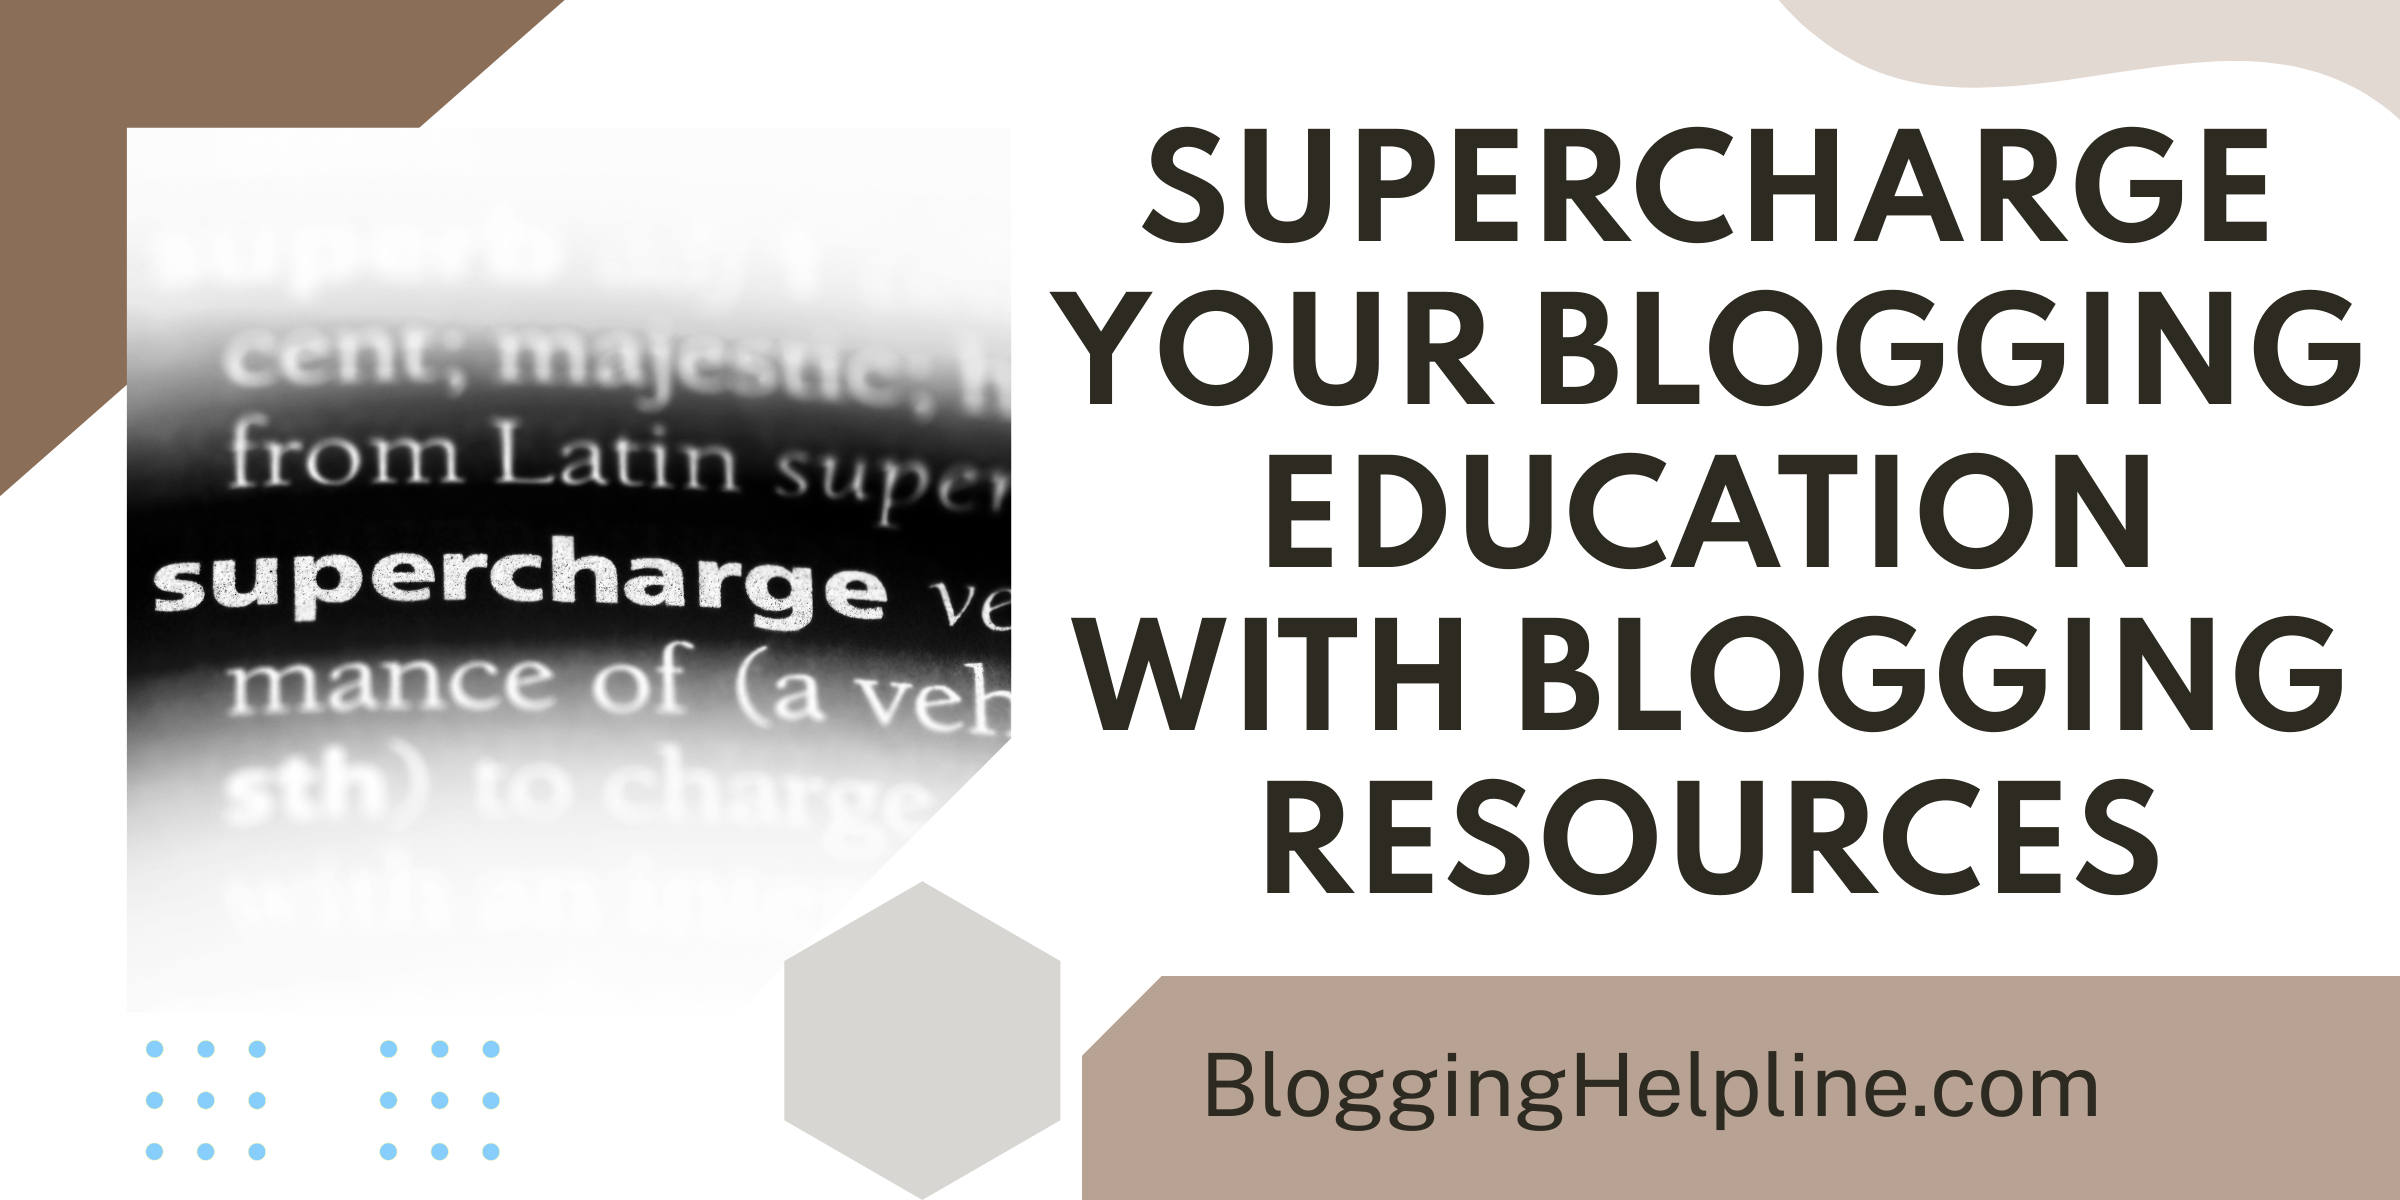 Supercharge Your Blogging Education with Blogging Resources